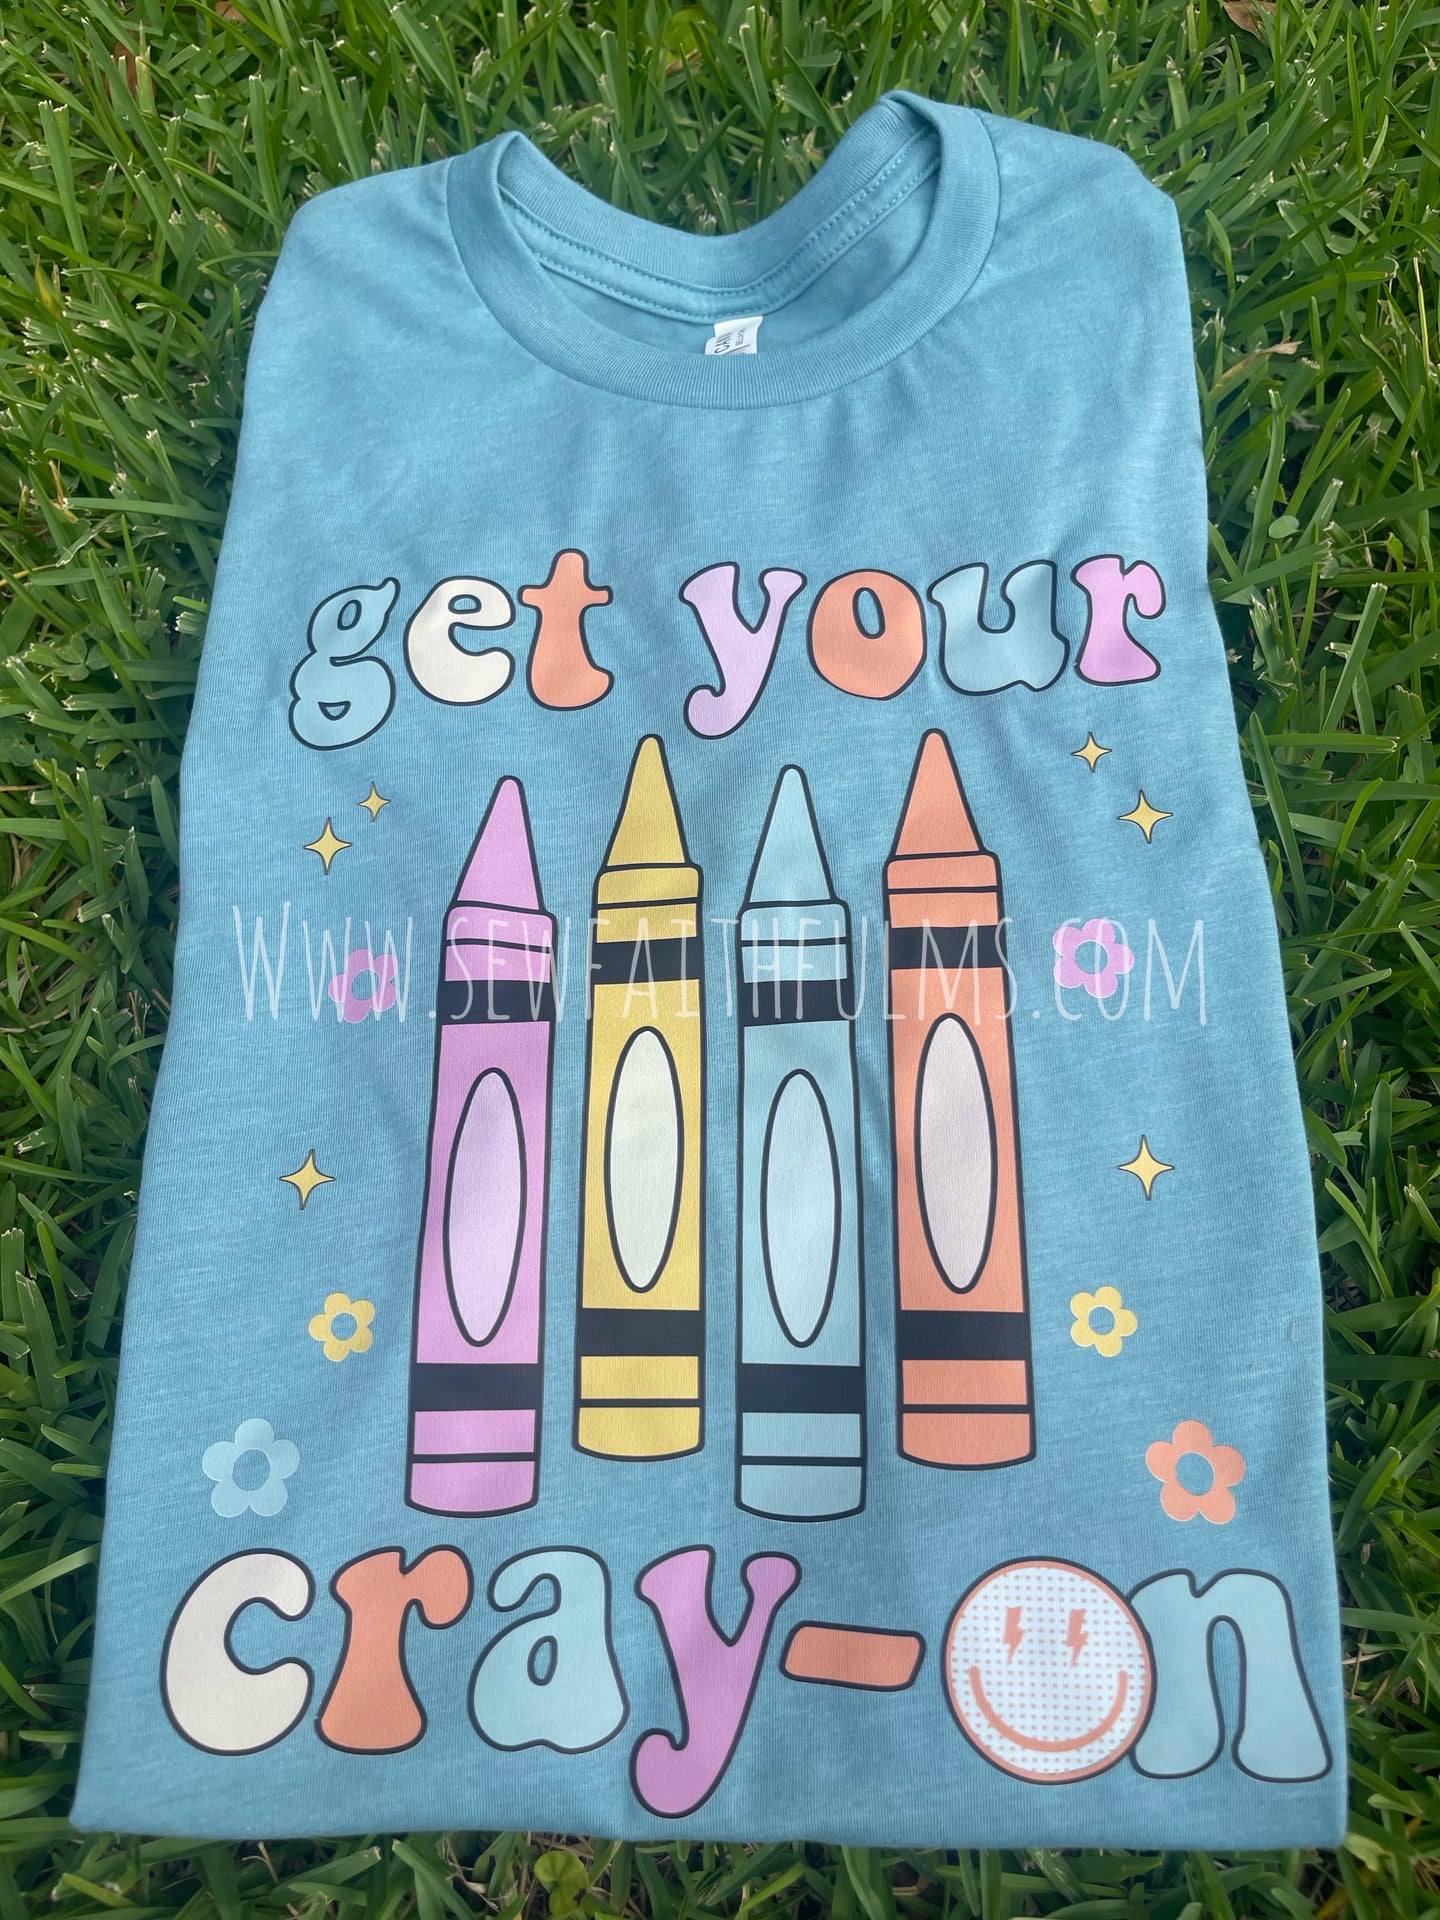 Get your CRAY ON